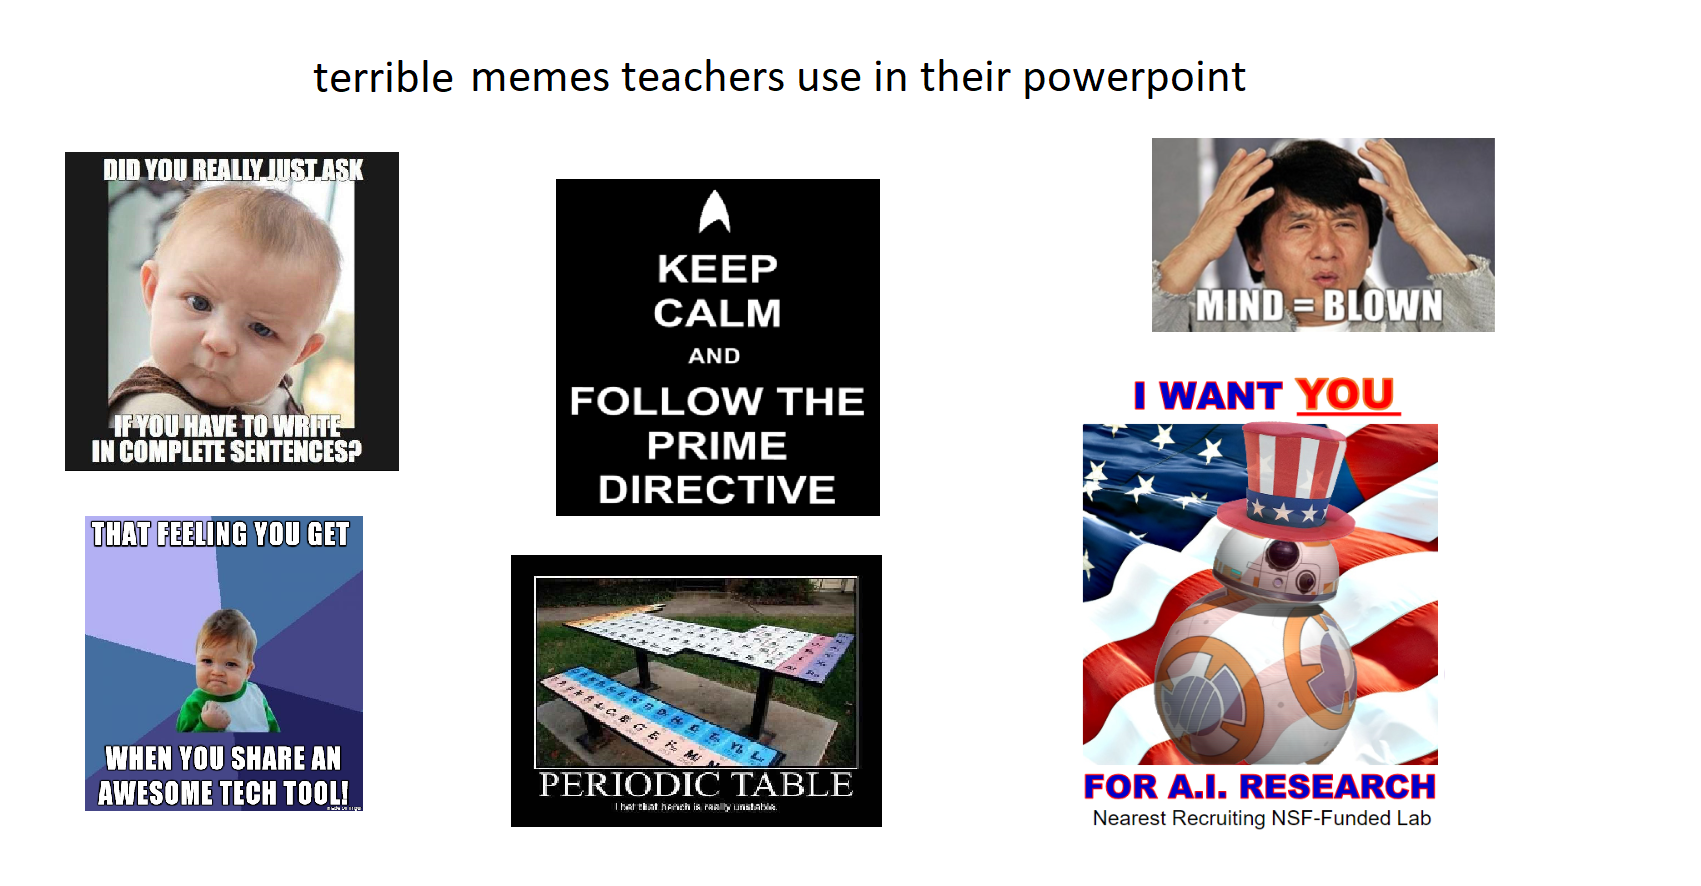 starter pack nigga memes - terrible memes teachers use in their powerpoint Did You Really Just Ask Mind Blown Keep Calm And The Prime Directive I Want You You Have To Write In Complete Sentences That Feeling You Get When You An Awesome Tech Tooli Periodic